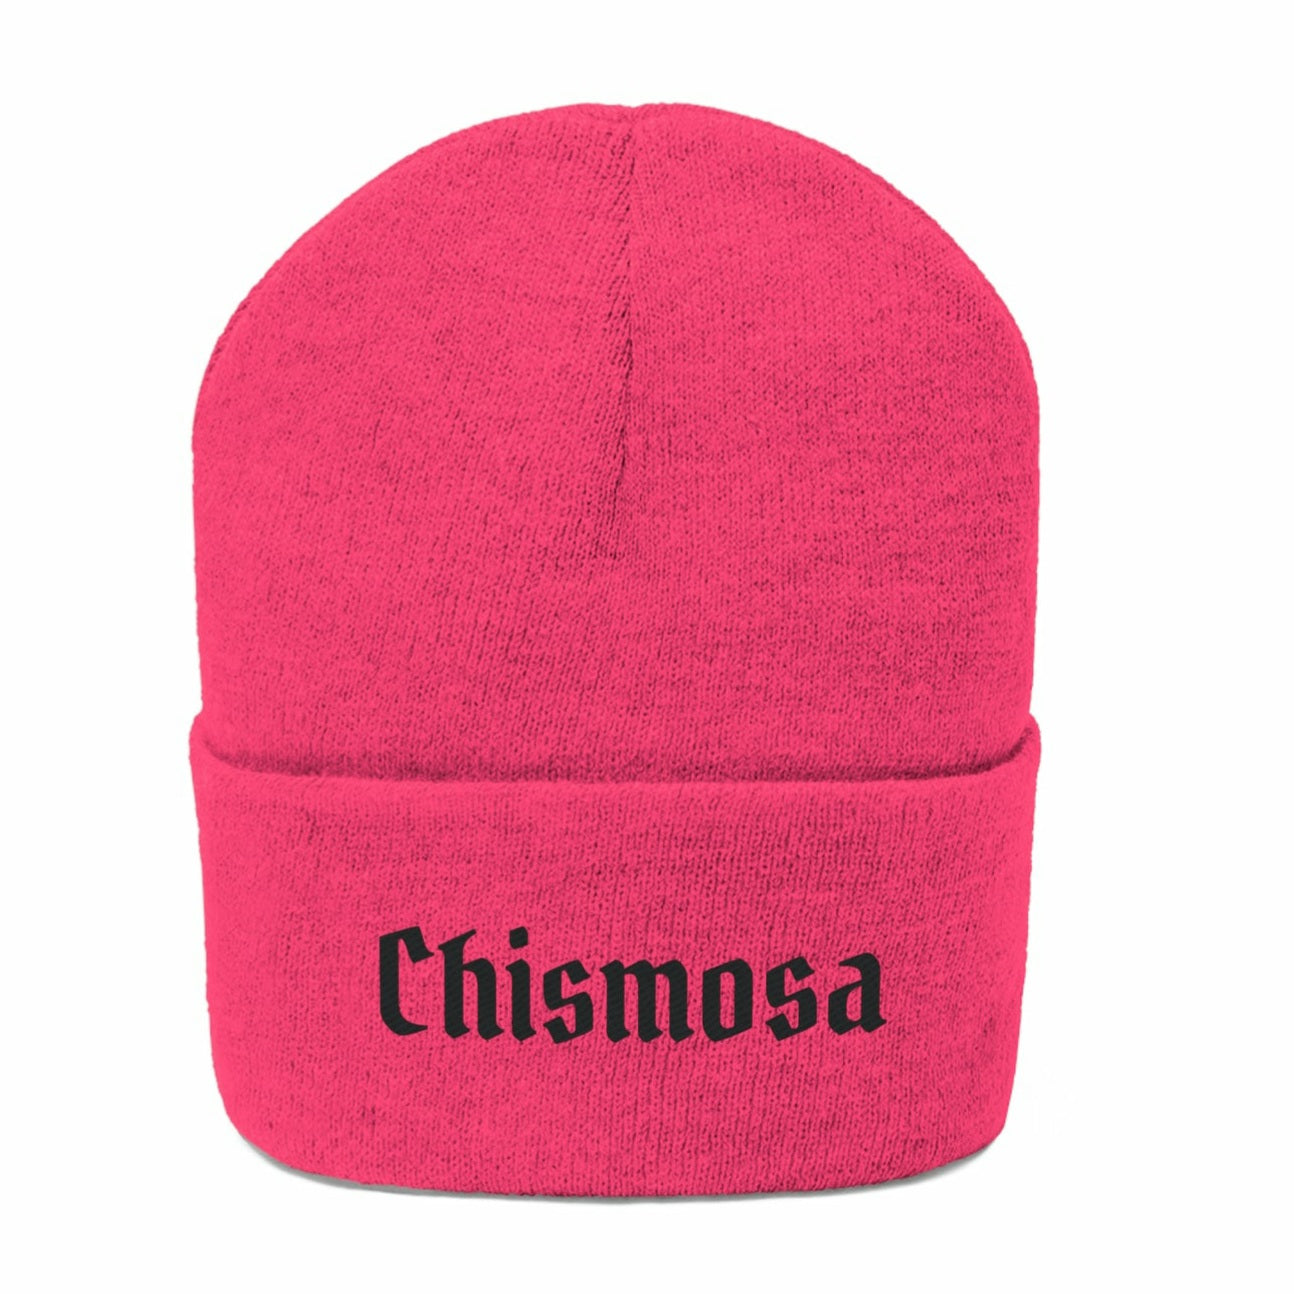 Funny Spanish Neon pink knit beanie hat for Hispanic women and Spanish speakers. The world "Chismosa" is embroidered in black old English style lettering  Edit alt text